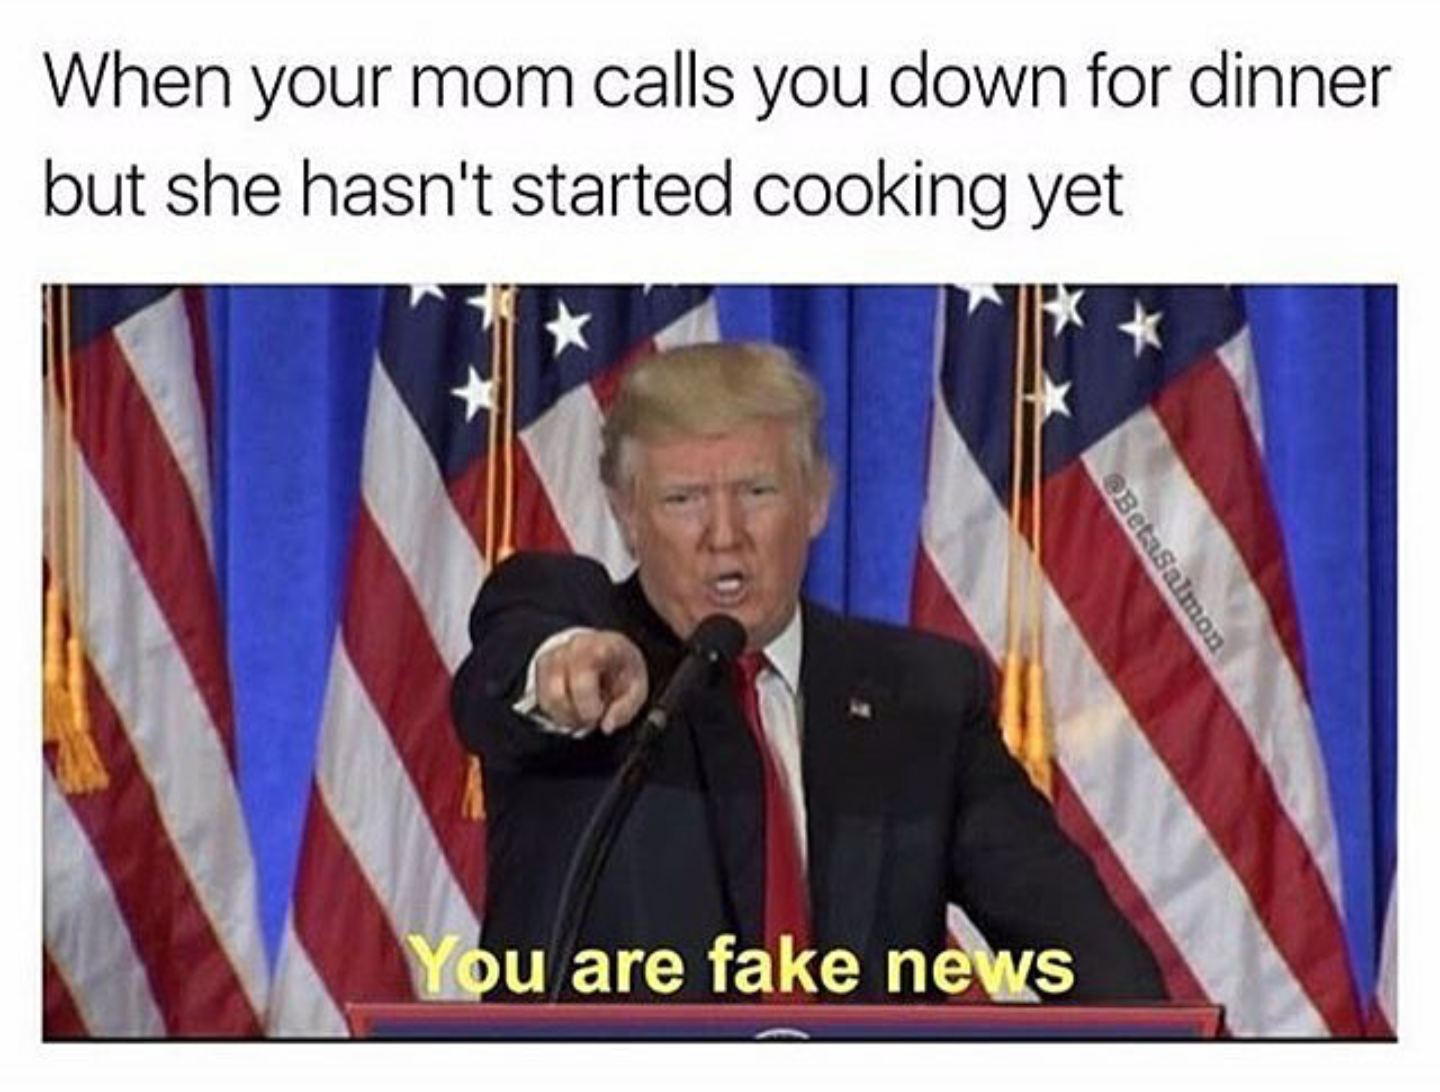 funny meme about ba sing se memes - When your mom calls you down for dinner but she hasn't started cooking yet BetaSalmon You are fake news